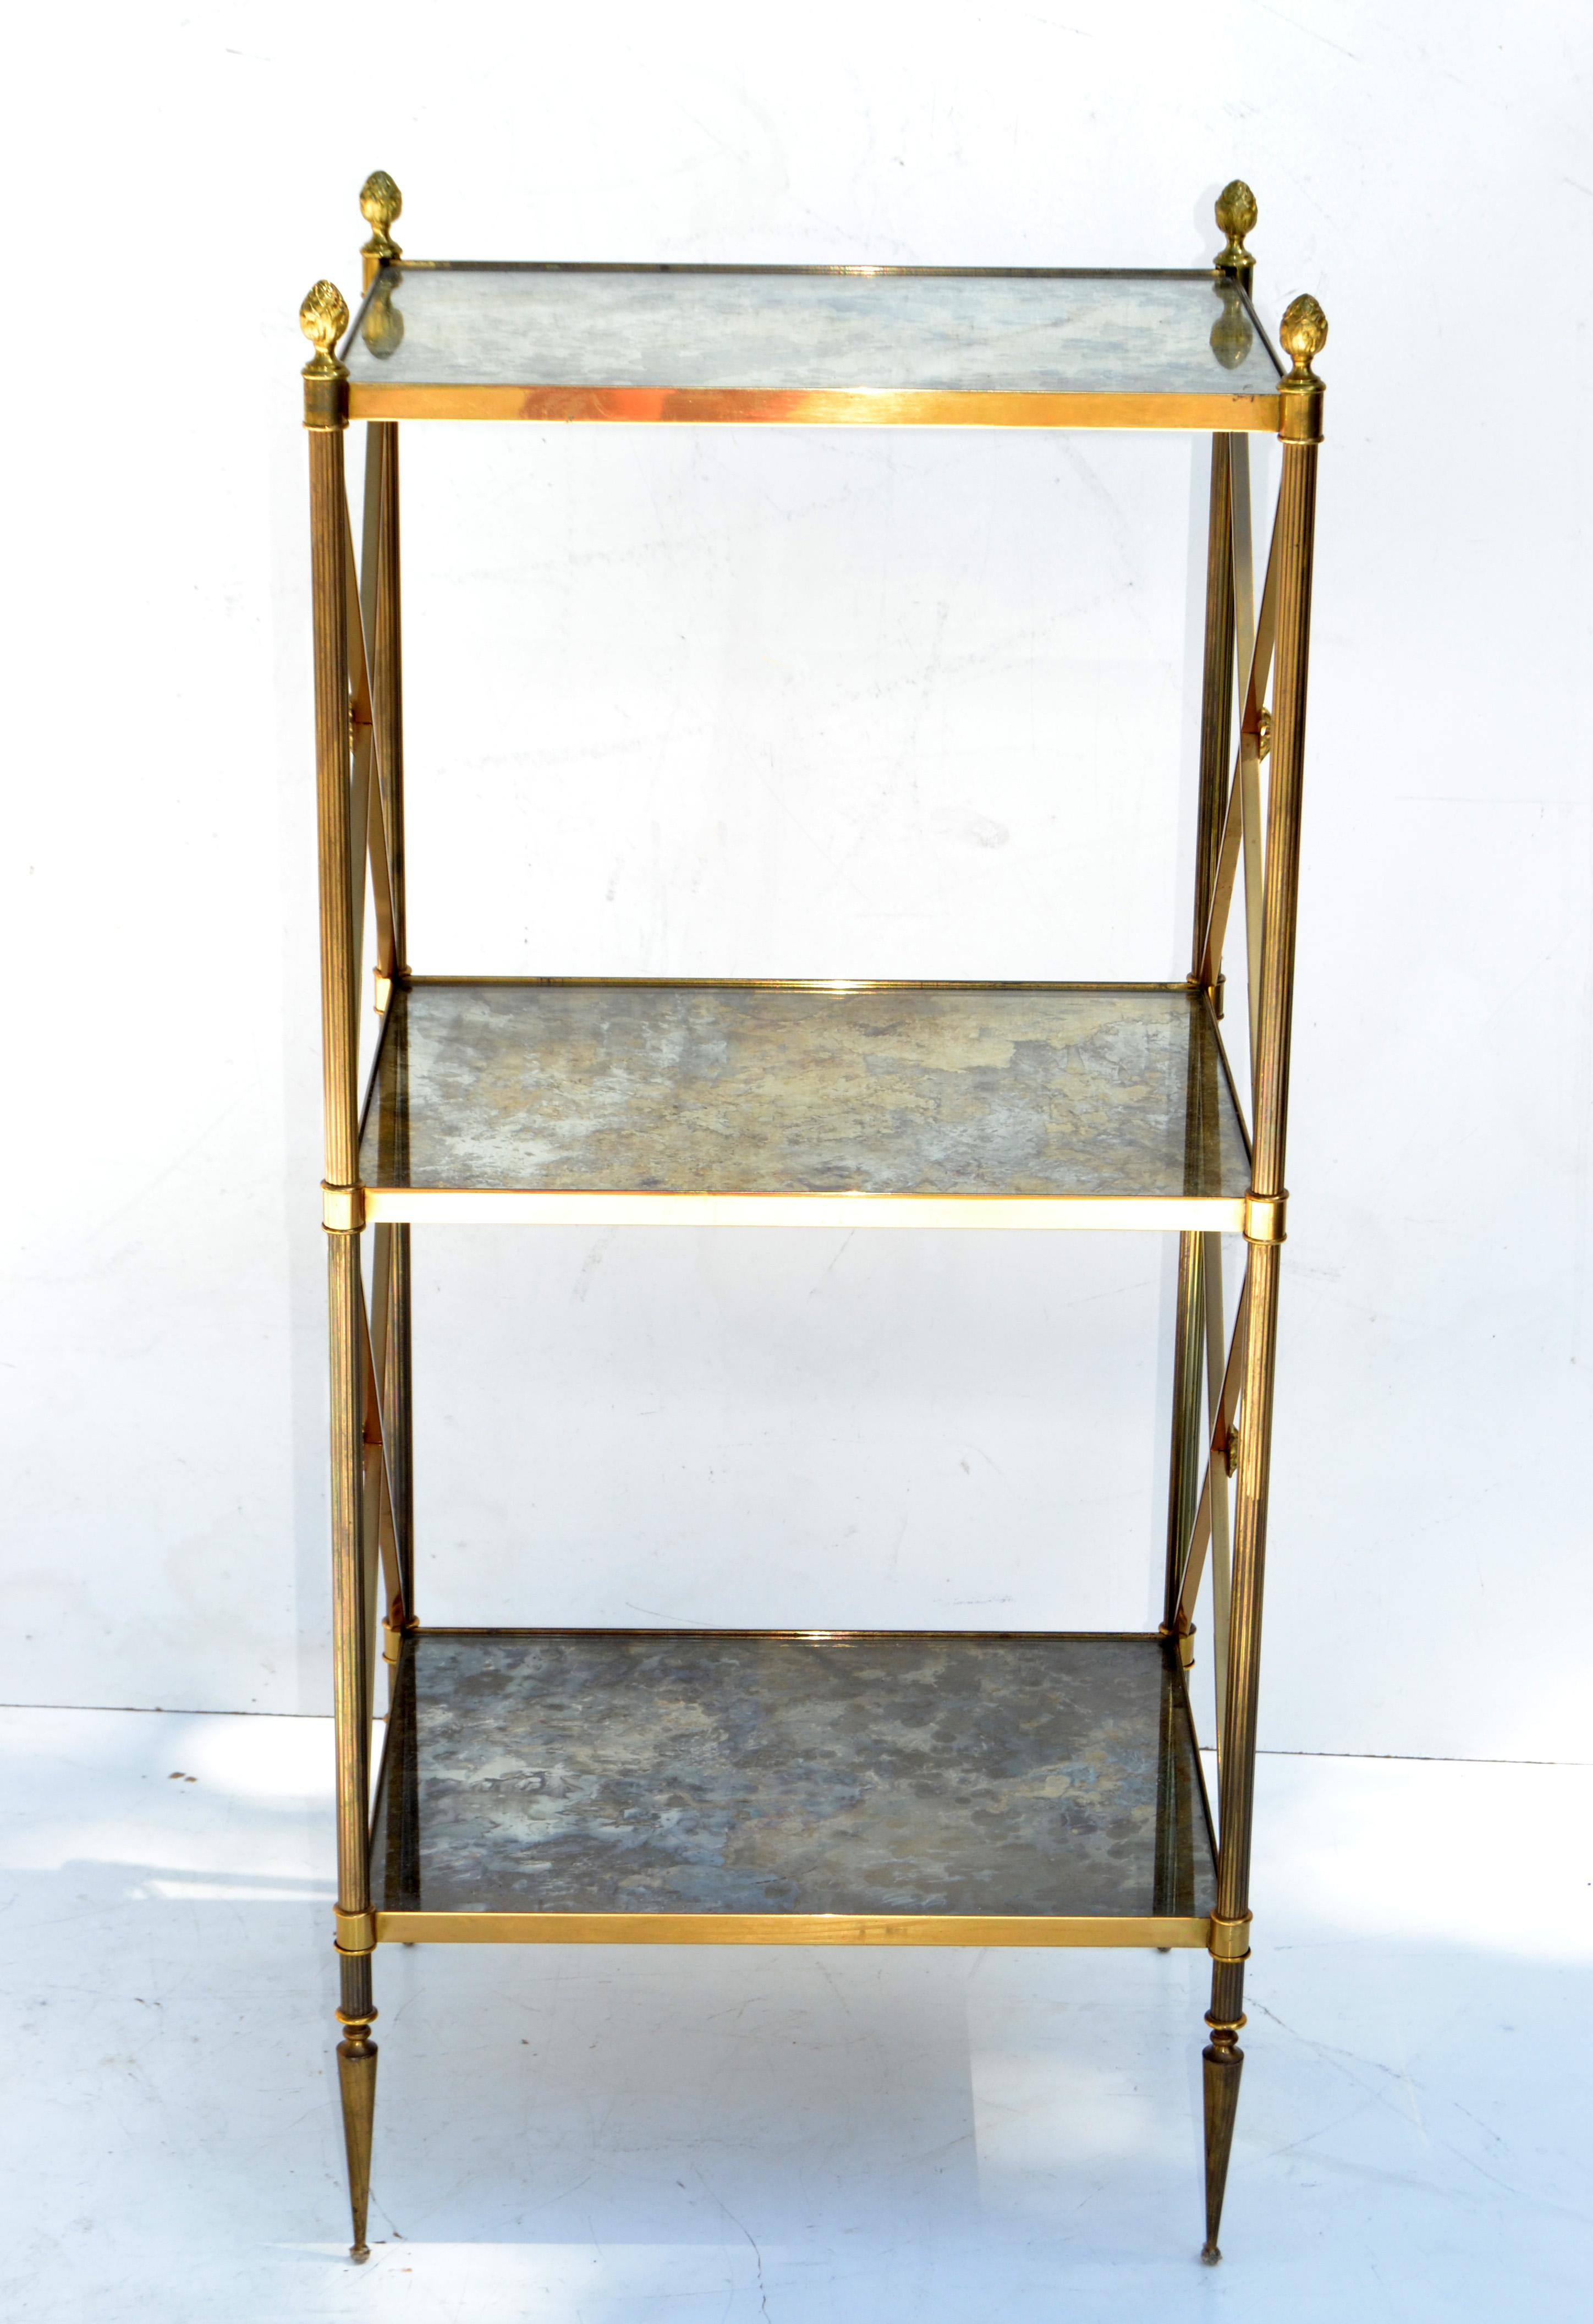 Superb Pair of Maison Baguès 3-tier side table in patinated brass with original mirrored cloudy glass.
Neoclassical French Design from the late 1950.
Very good vintage condition.
 